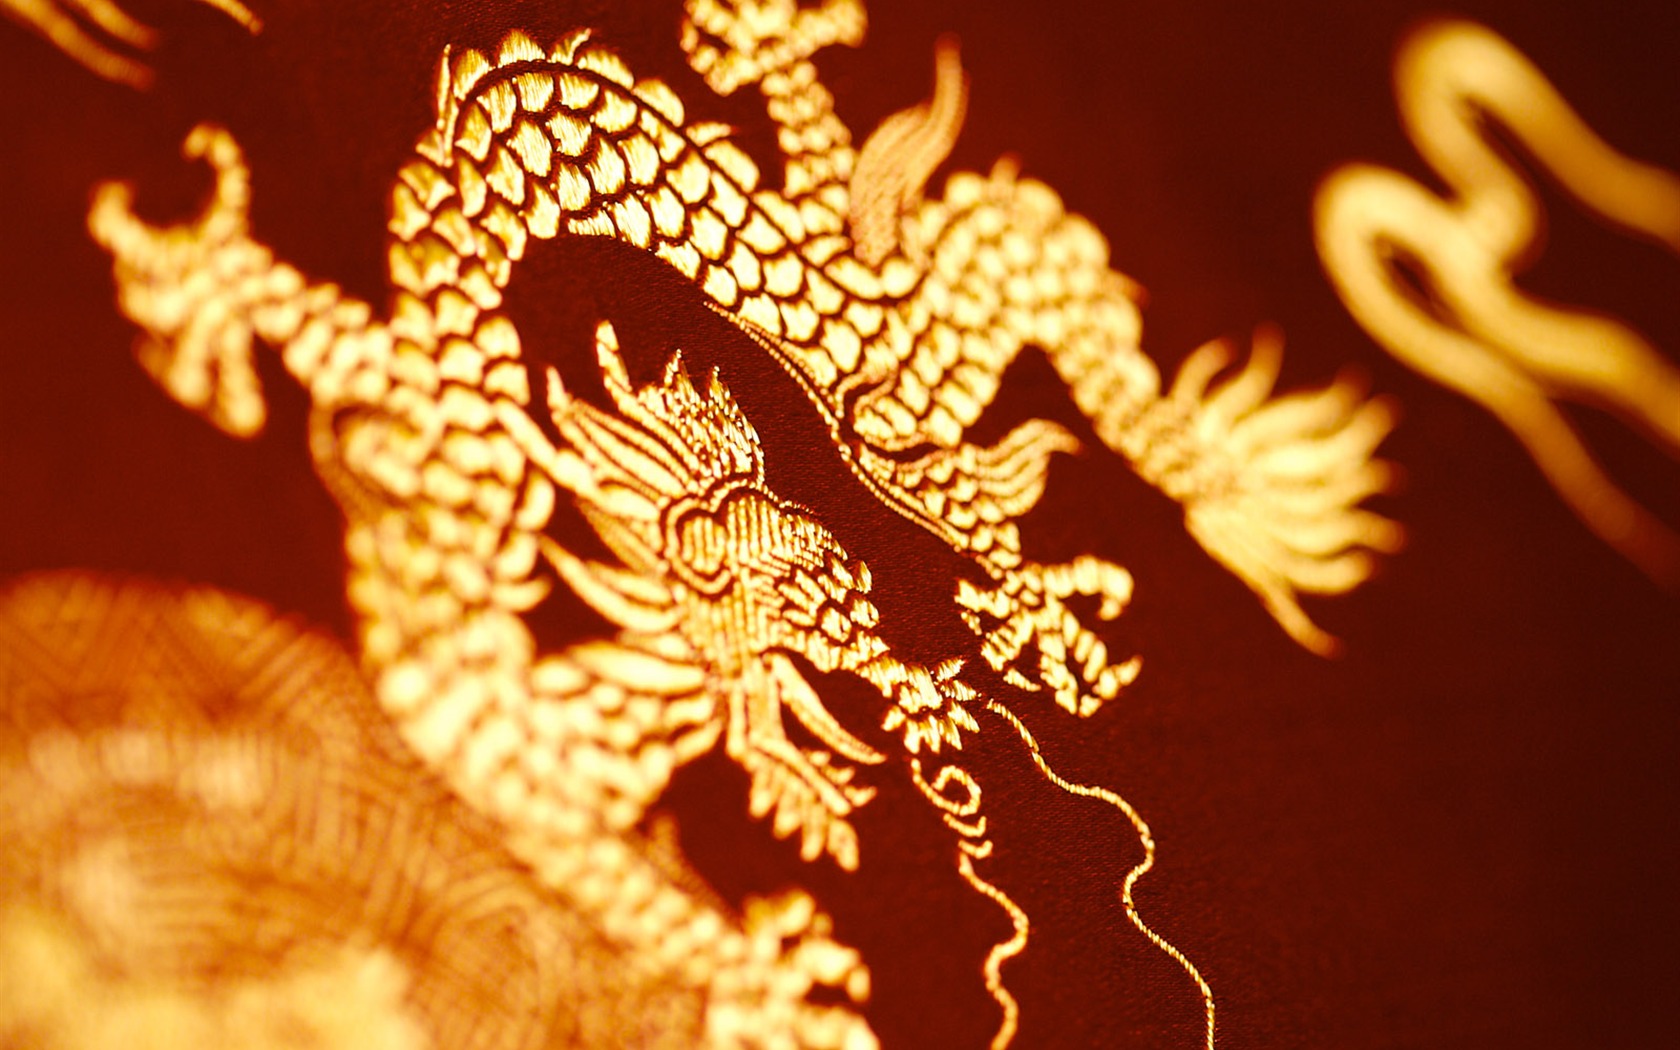 China Wind exquisite embroidery Wallpaper #10 - 1680x1050